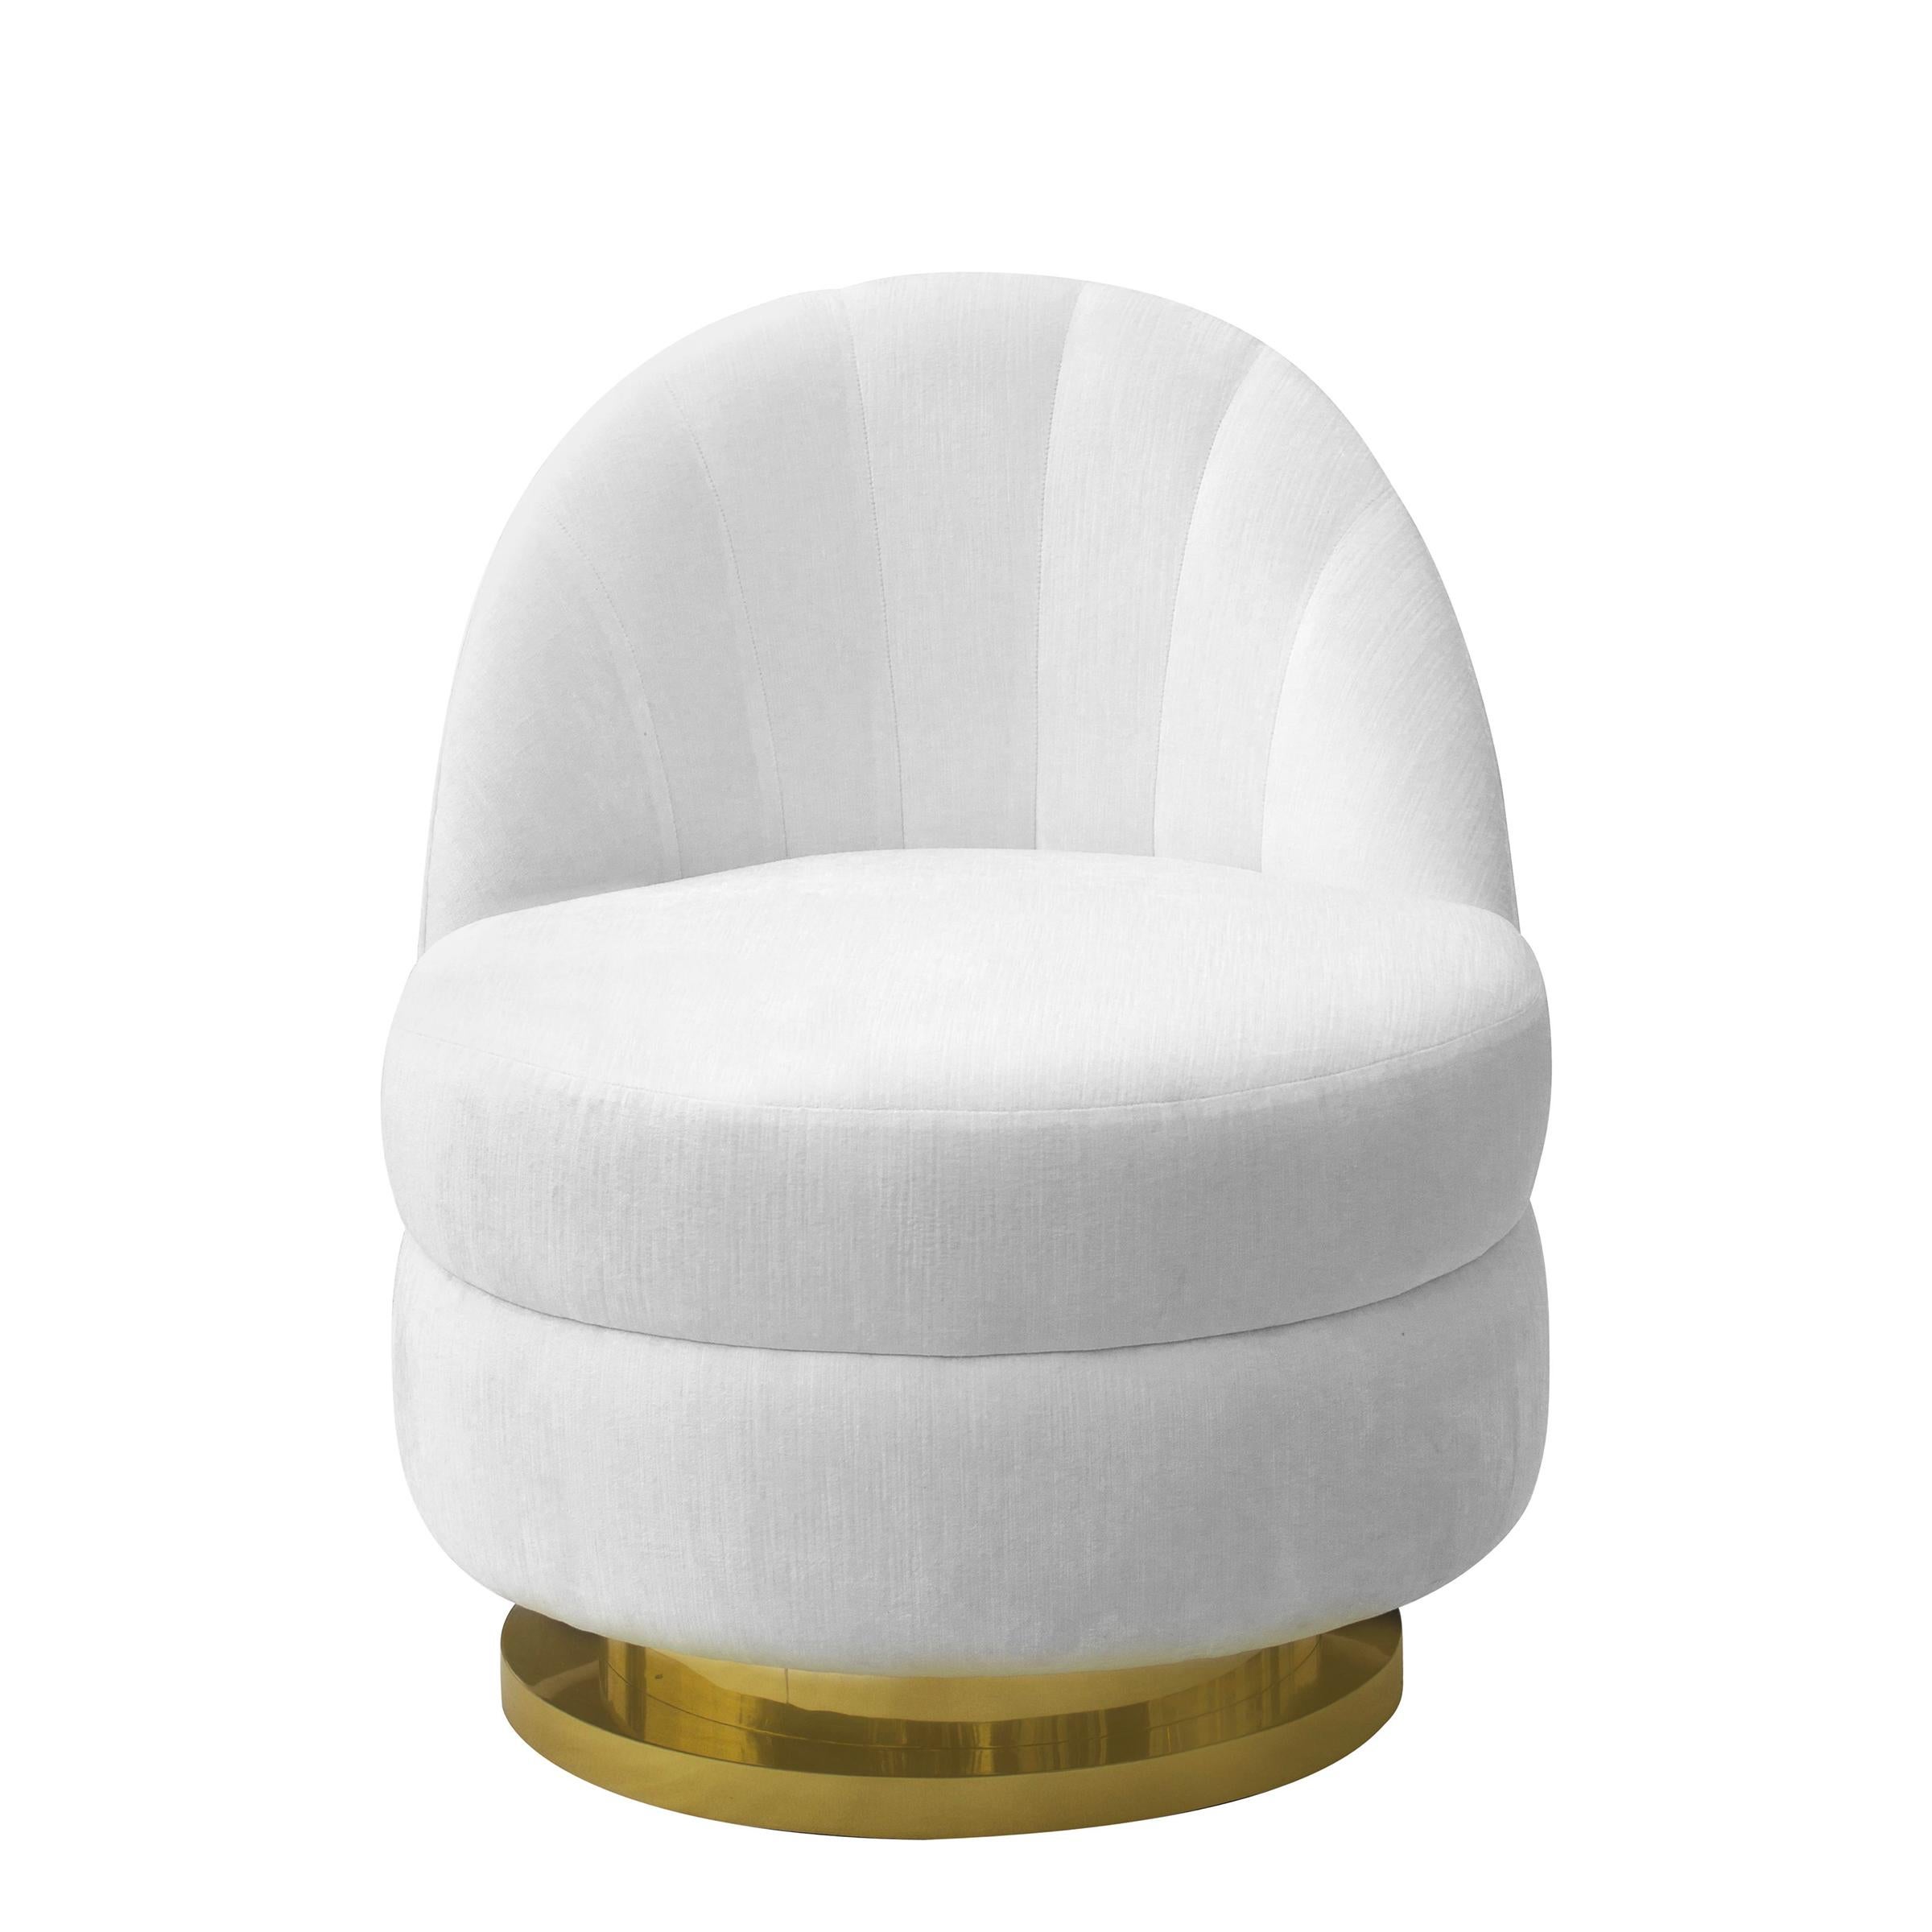 Armchair stanford swivel with structure in solid wood,
upholstered and covered with white smooth velvet fabric.
With polished brass 360° swivel base.
Also available with other fabrics on request.